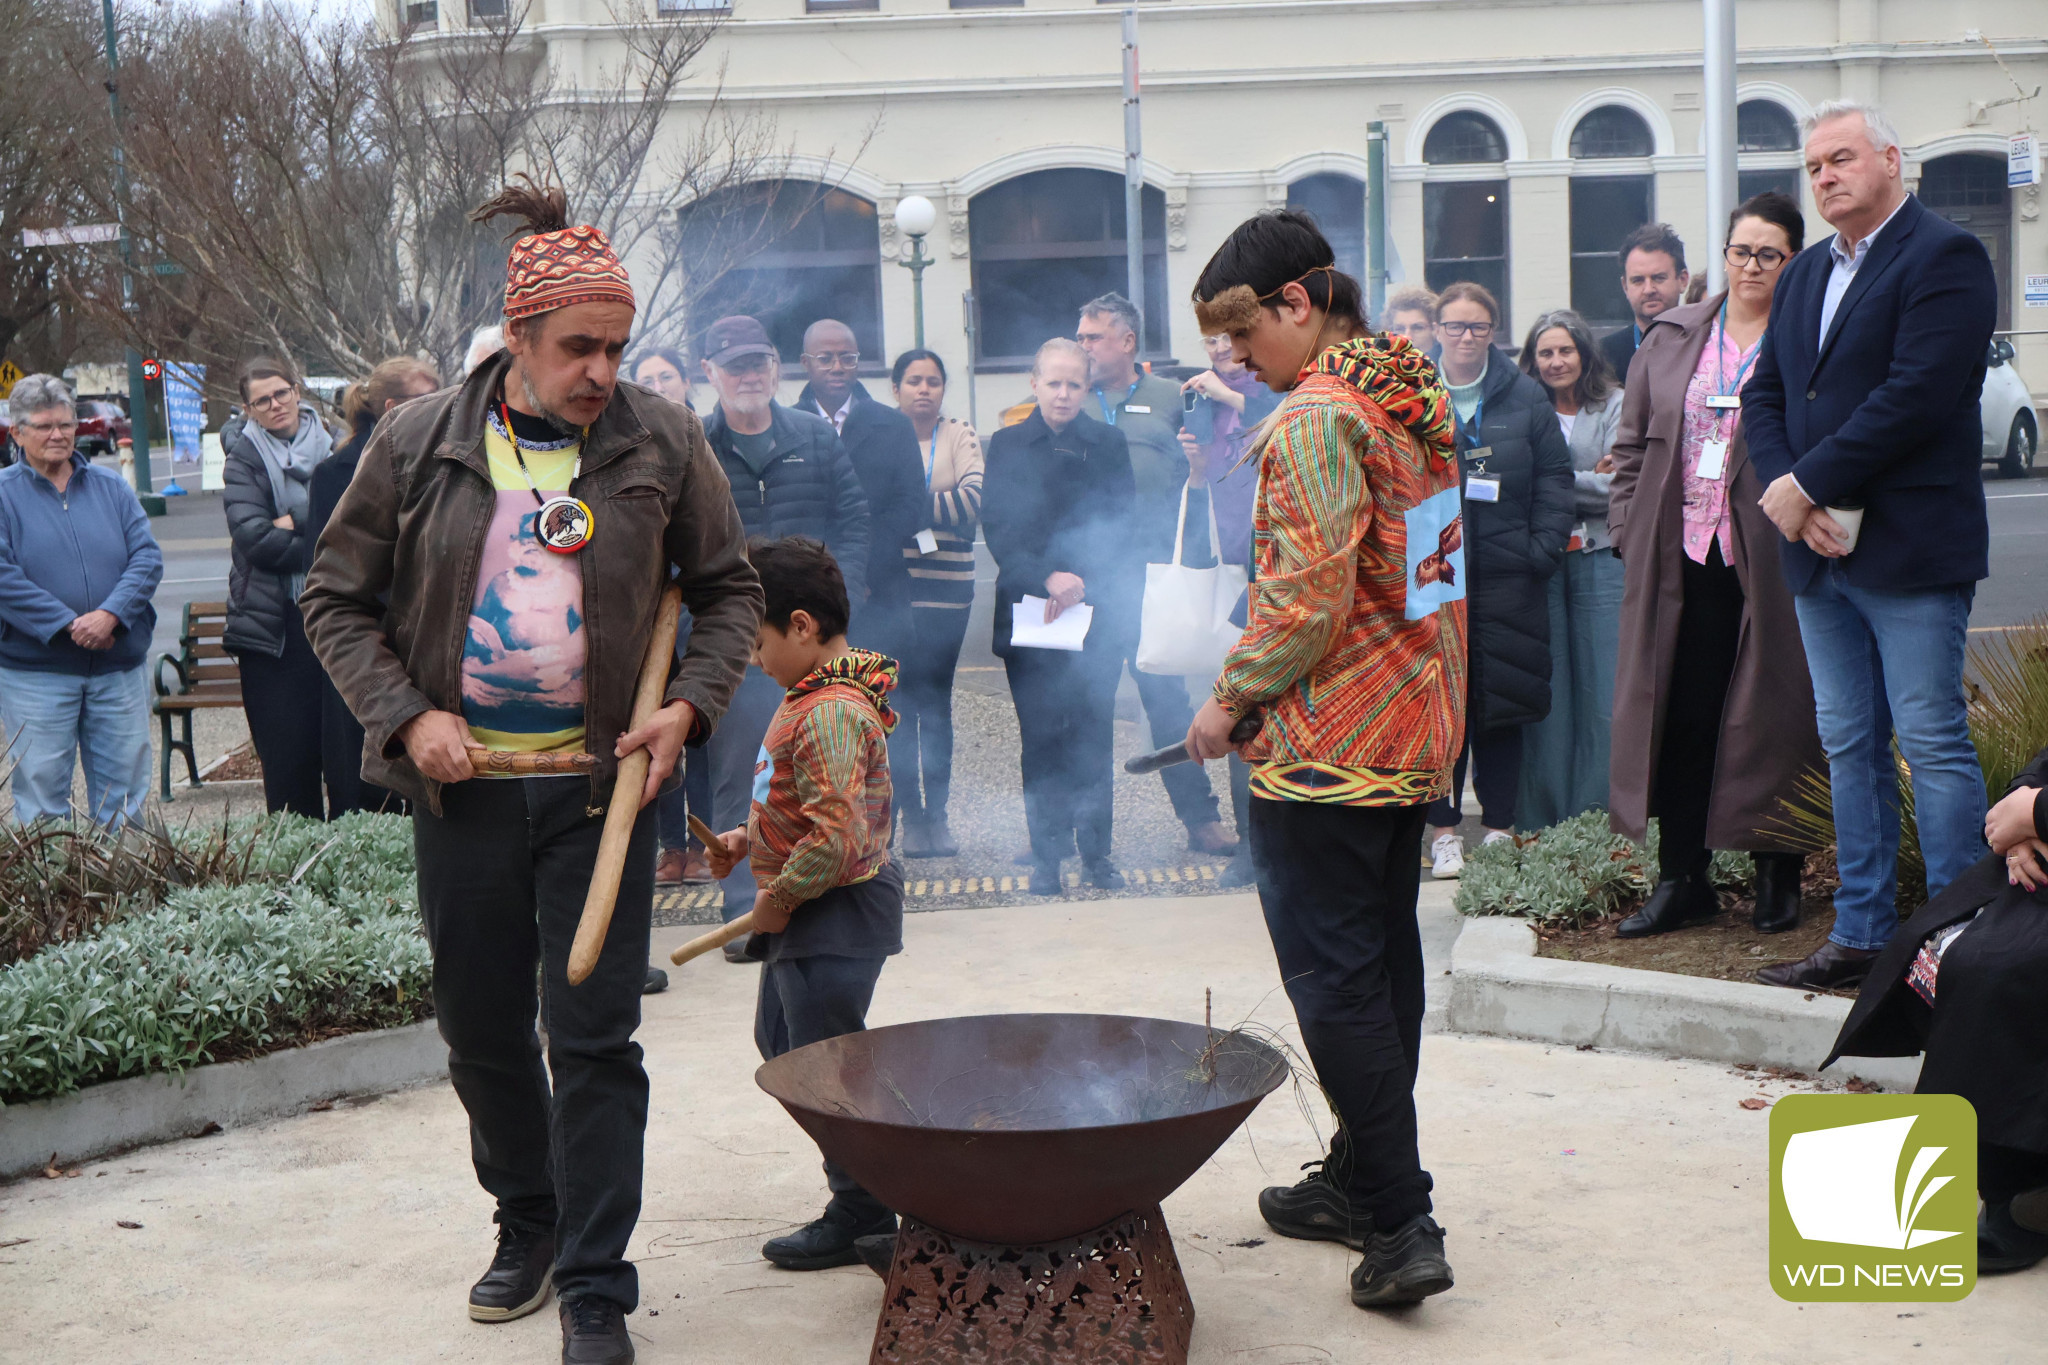 Celebrating culture: A special ‘Welcome to Country’ ceremony was performed by local Indigenous man Brett Clarke and his sons, Wirran and Jirra.